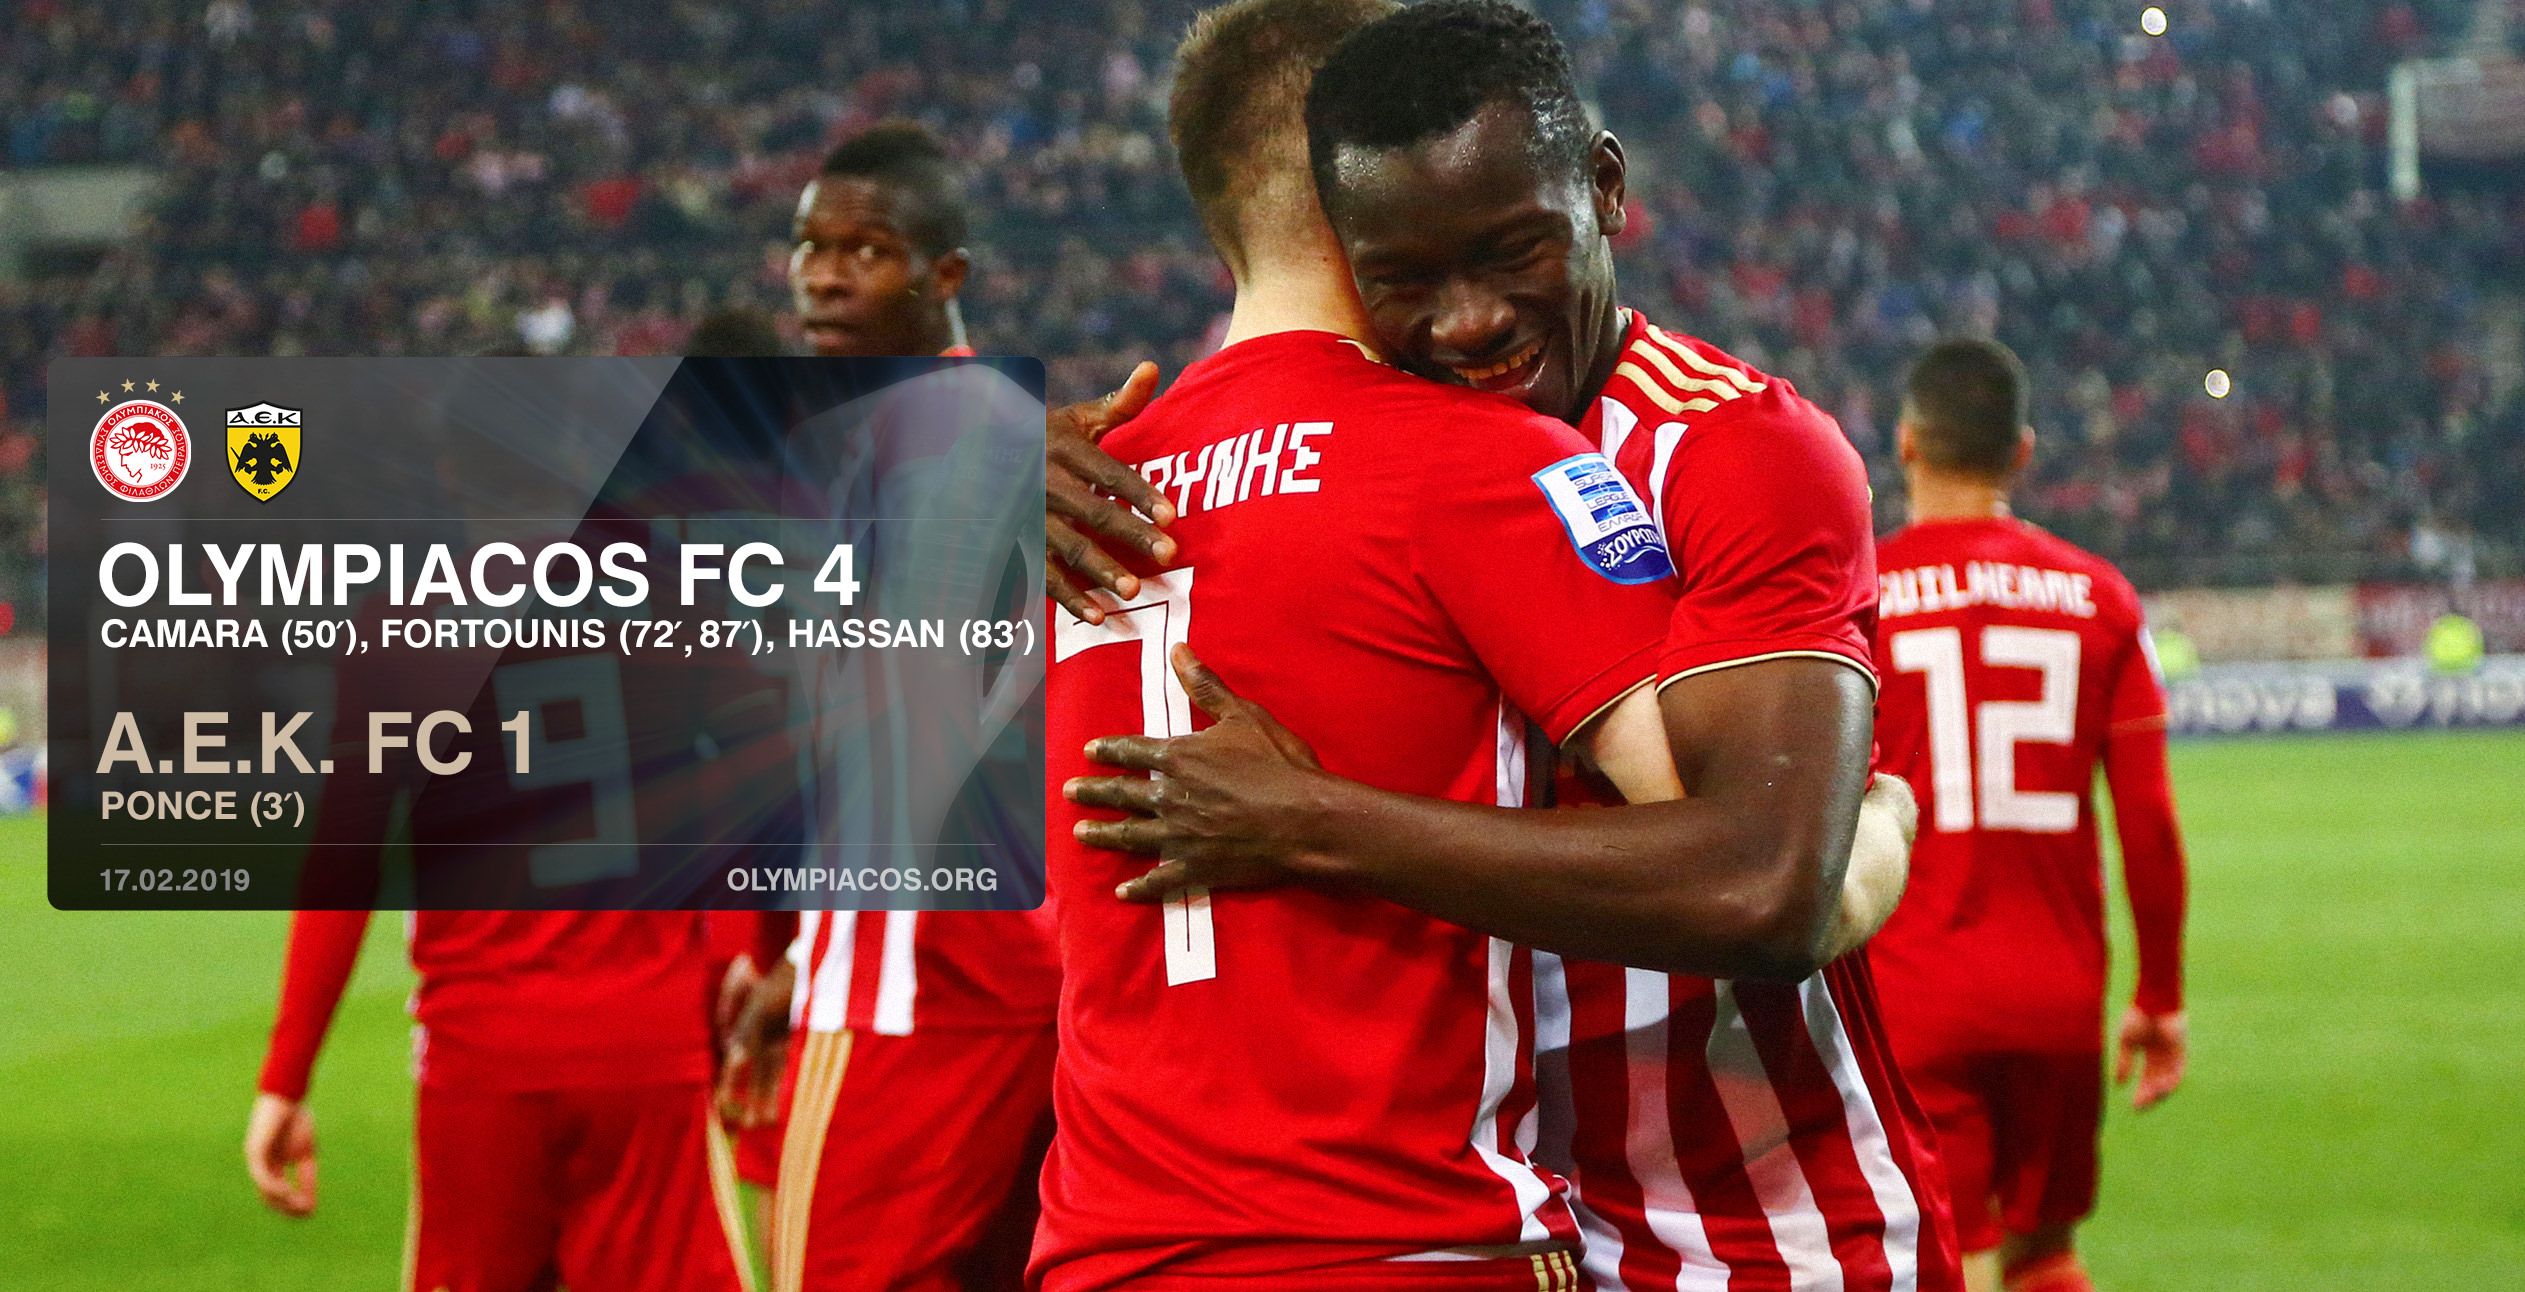 Victorious, triumphant OLYMPIACOS!